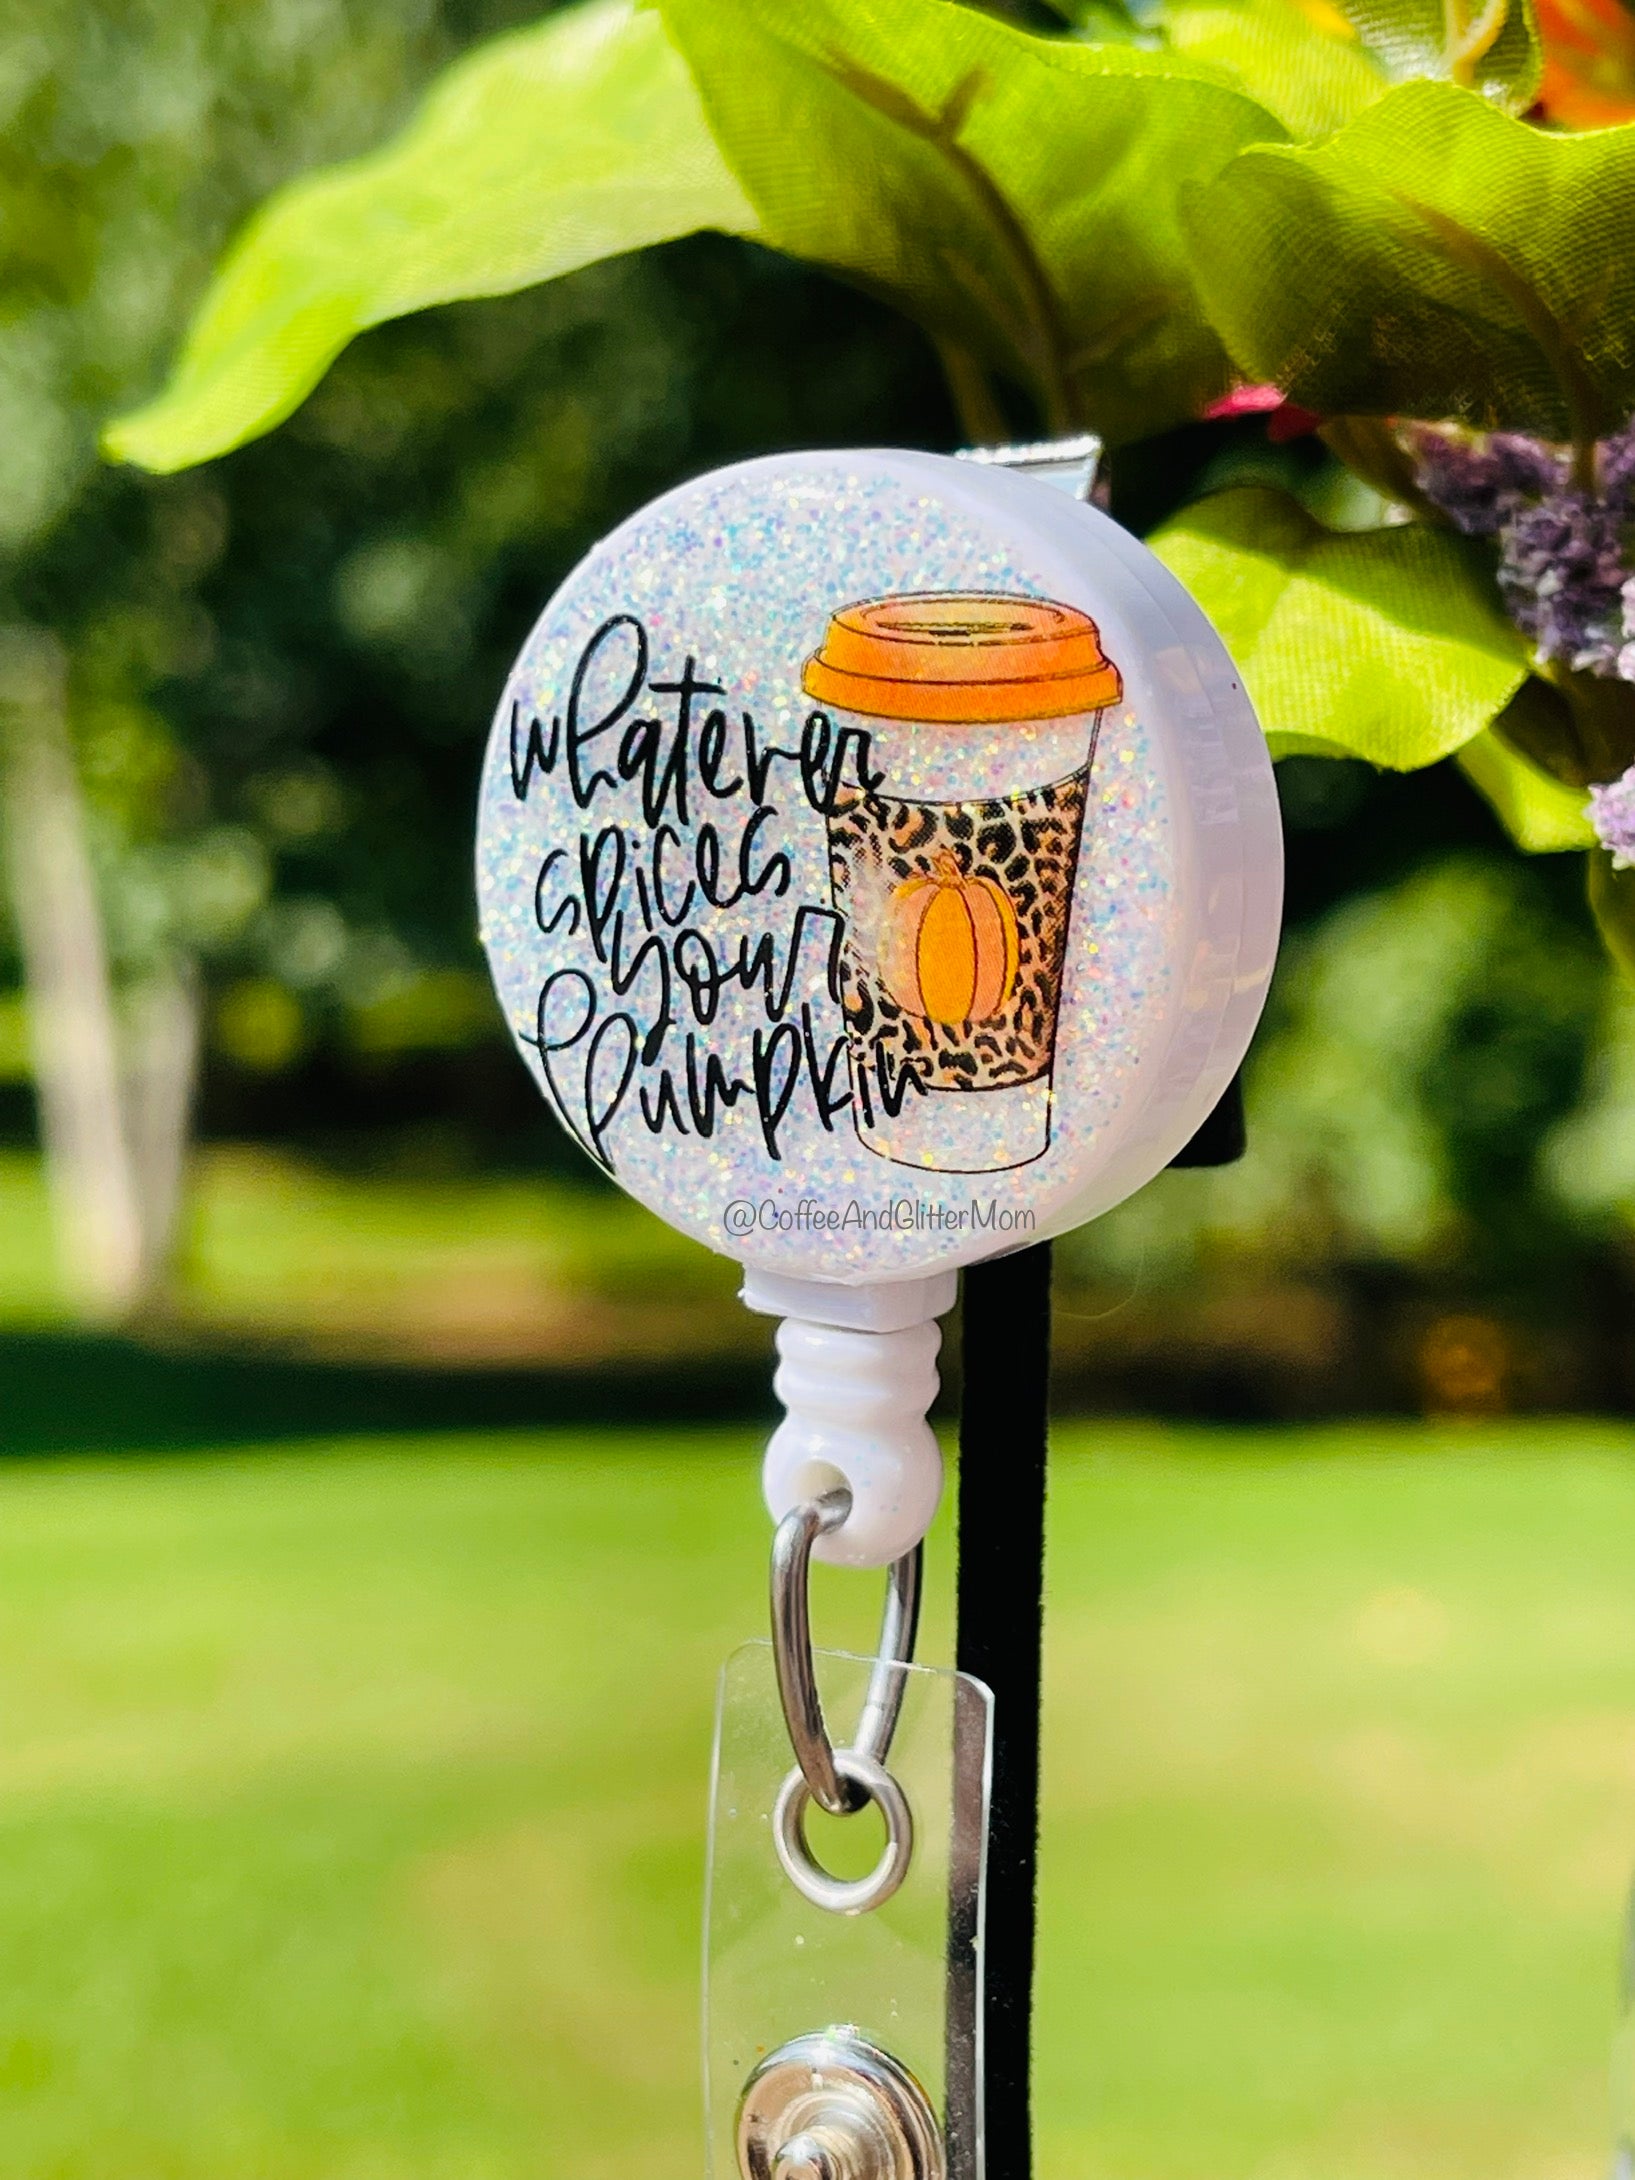 Whatever Spices Your Pumpkin Halloween Badge Reel – Coffee And Glitter Mom